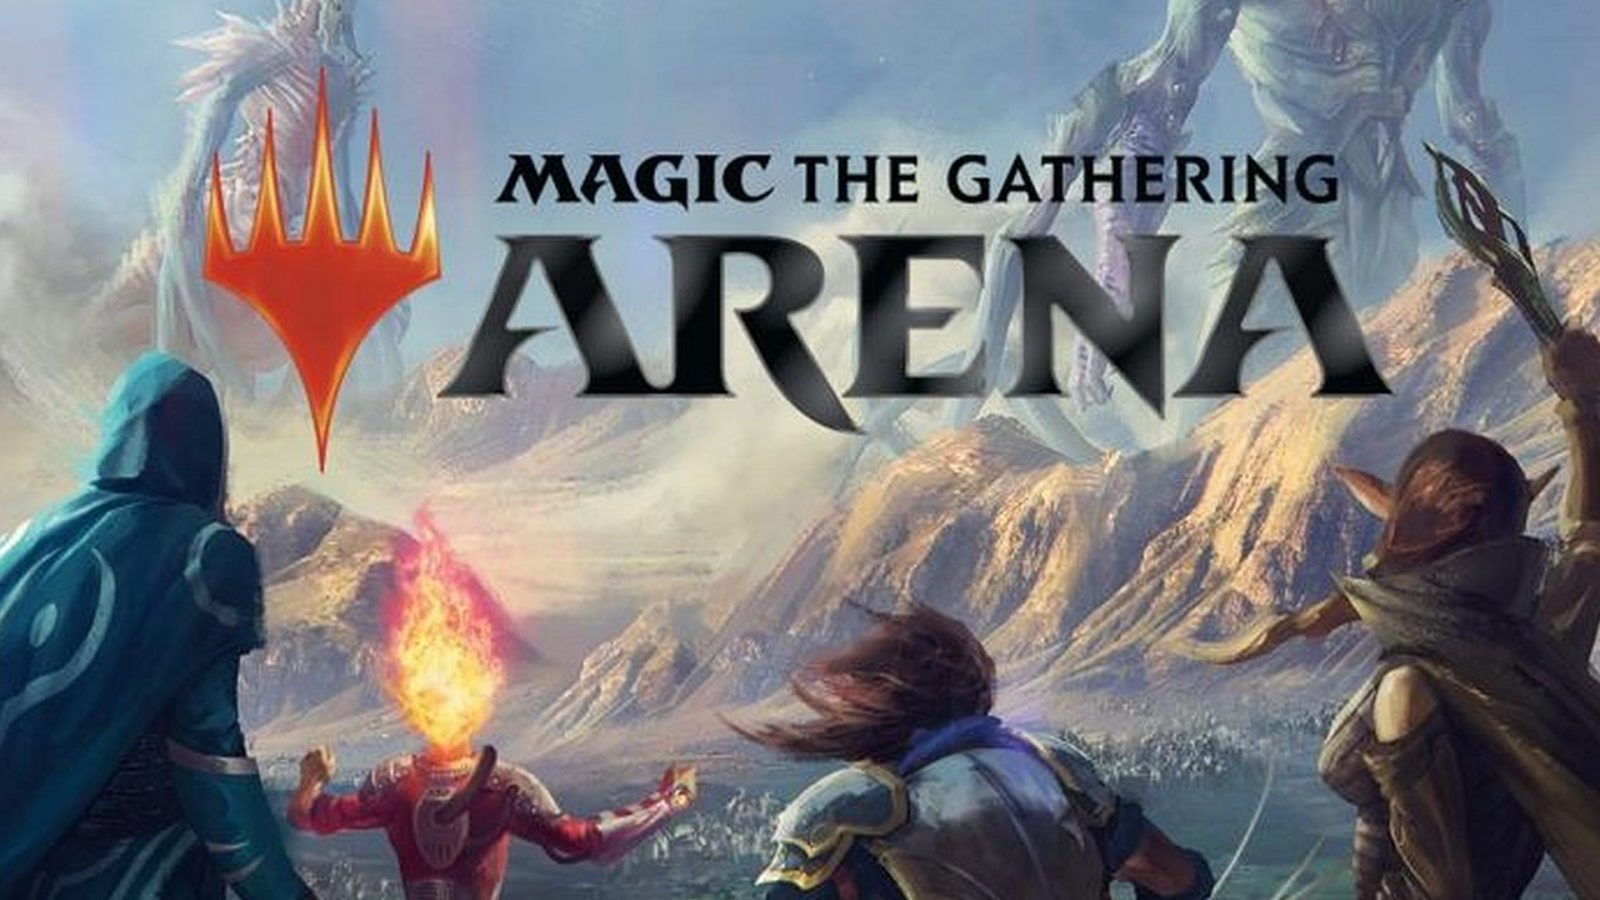 magic-the-gathering-arena-now-available-for-iphone-and-ipad-9to5mac